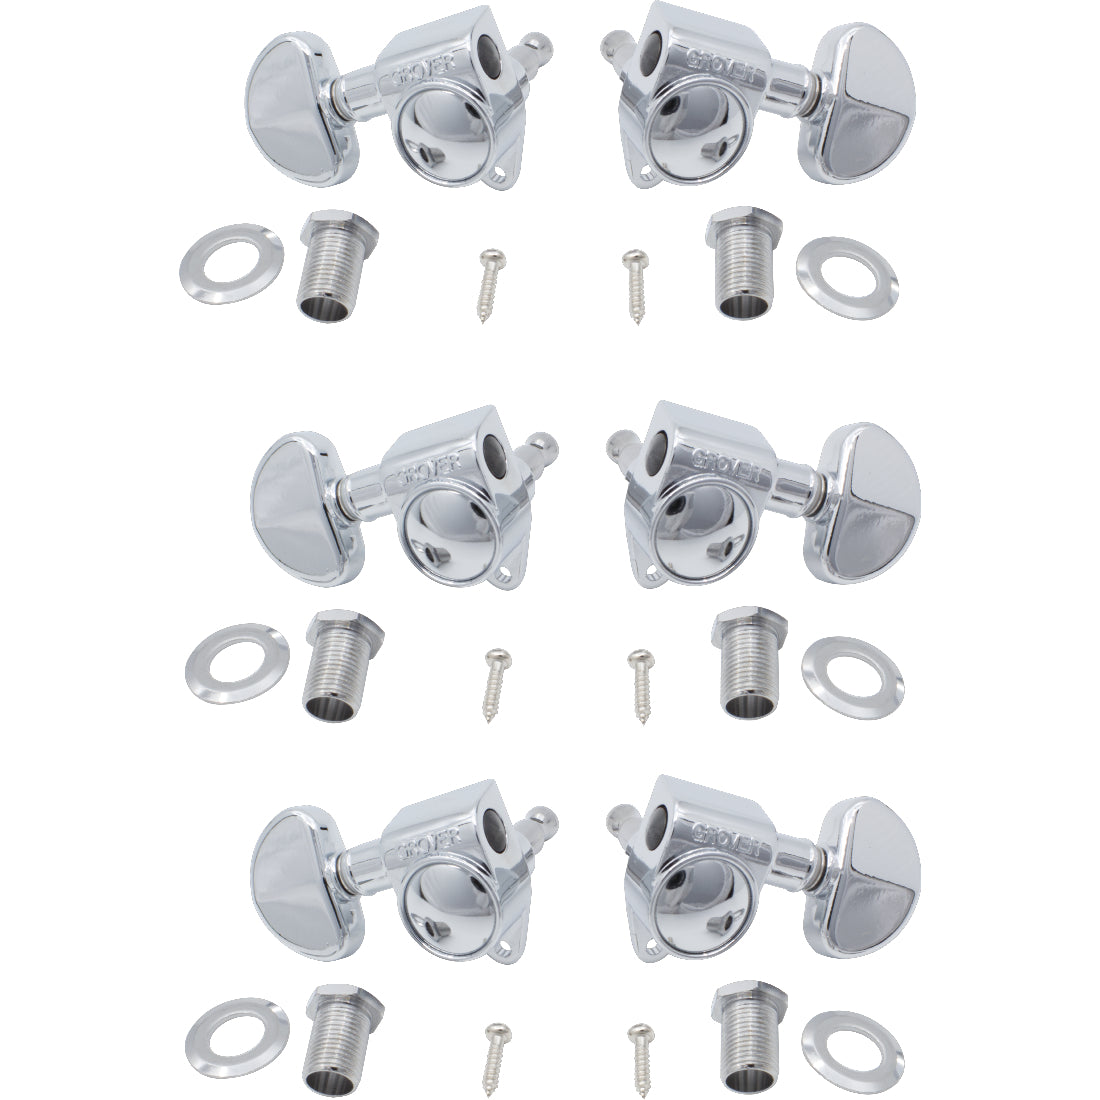 Grover Rotomatic 10218c Tuners For Guitar, 6 Pieces, Chrome